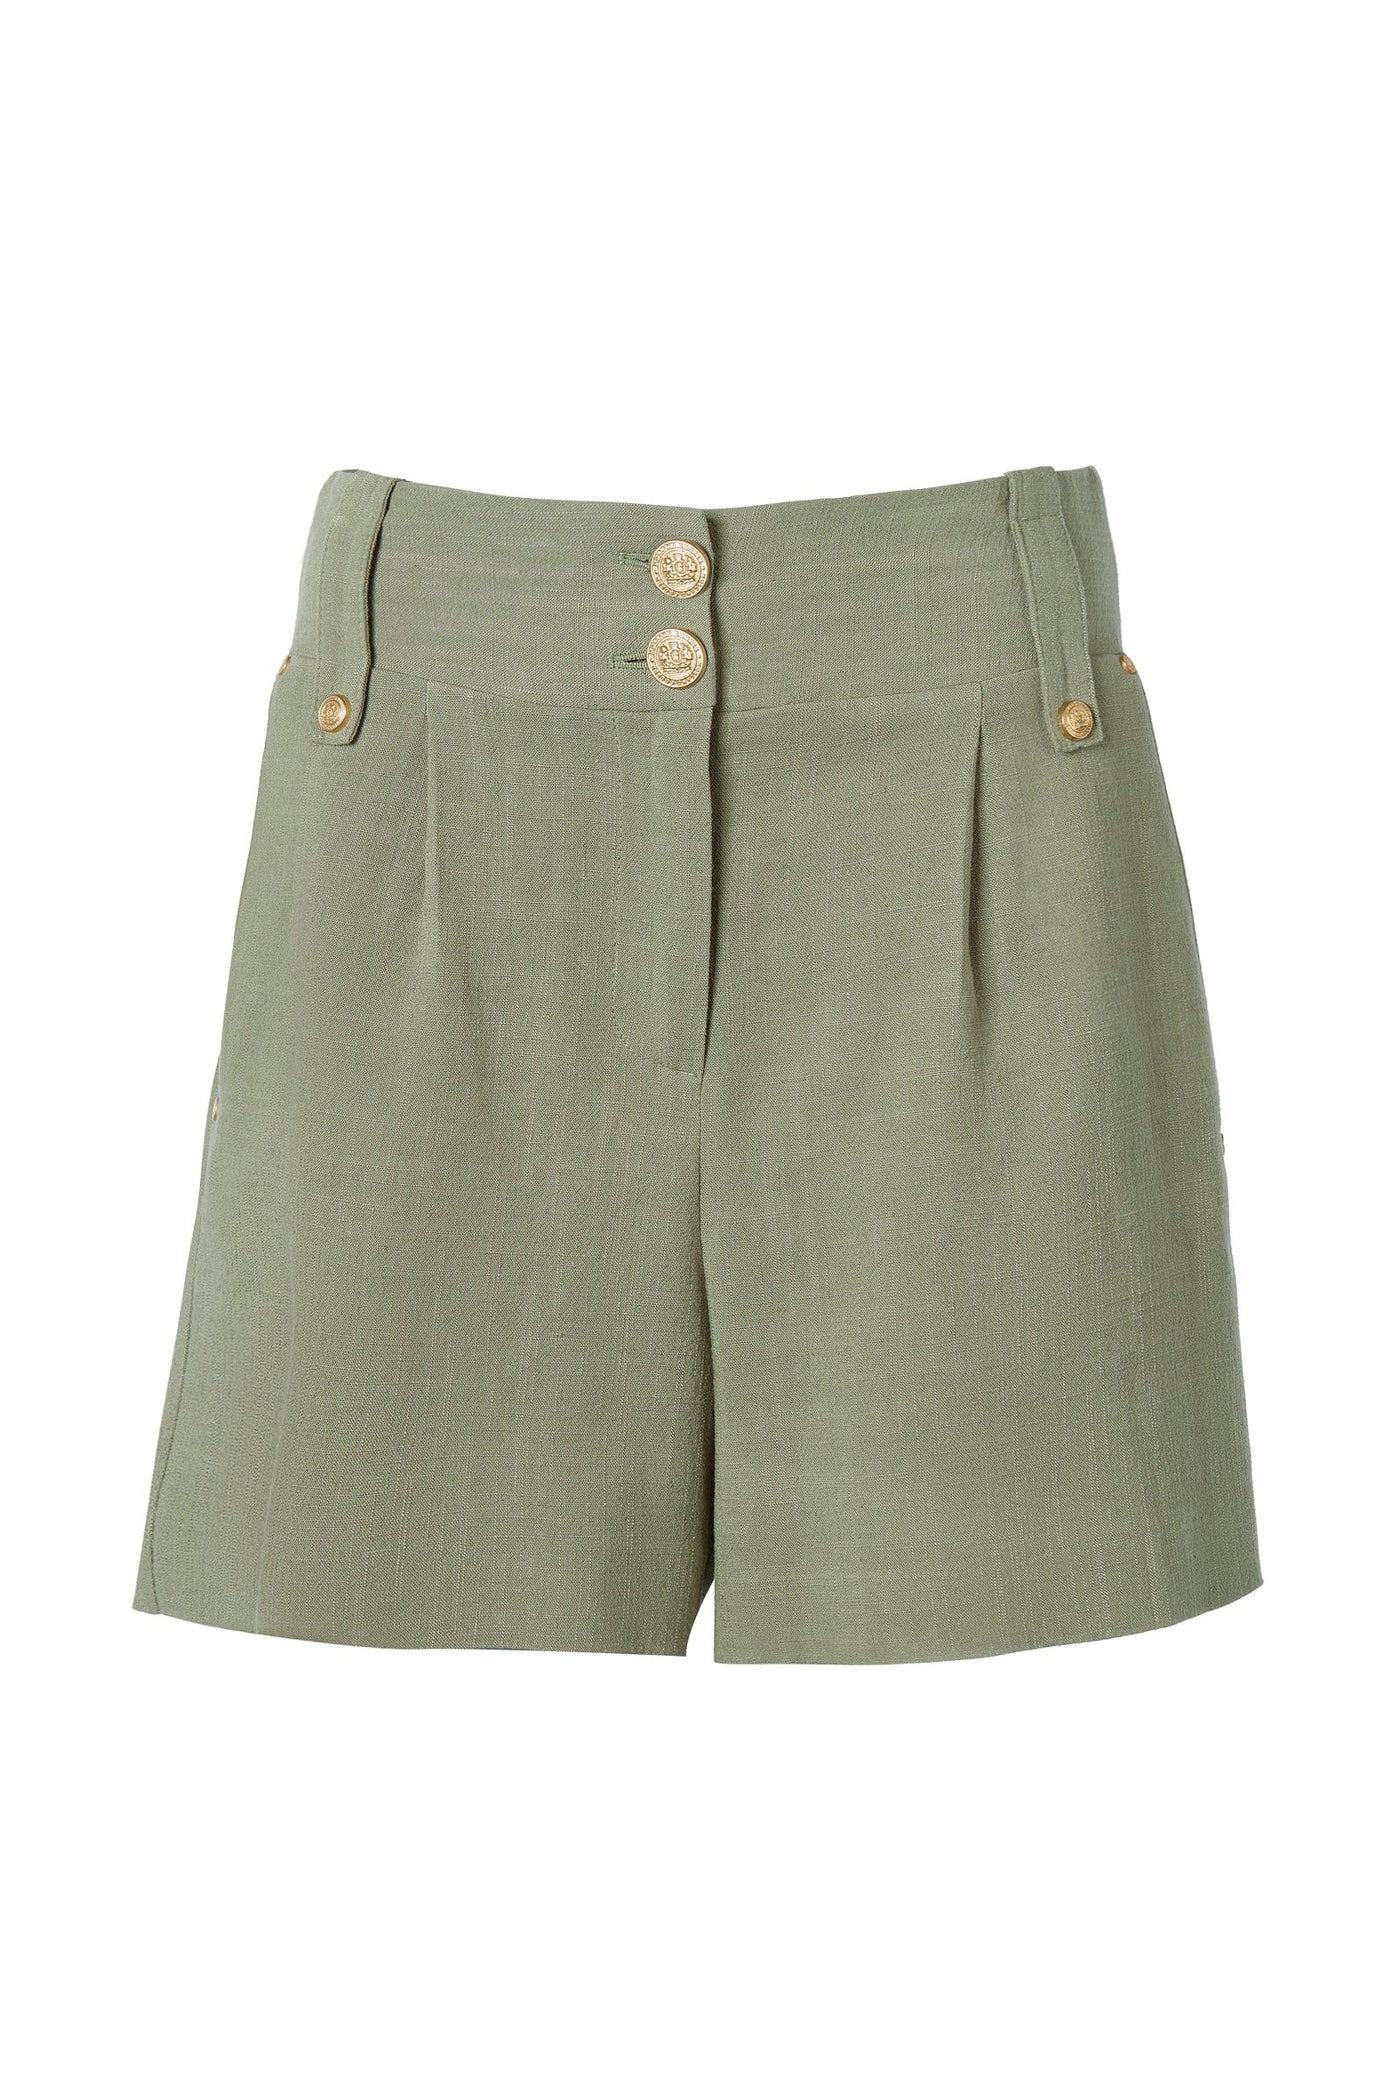 Holland Cooper Tailored Linen Short in Sage Front